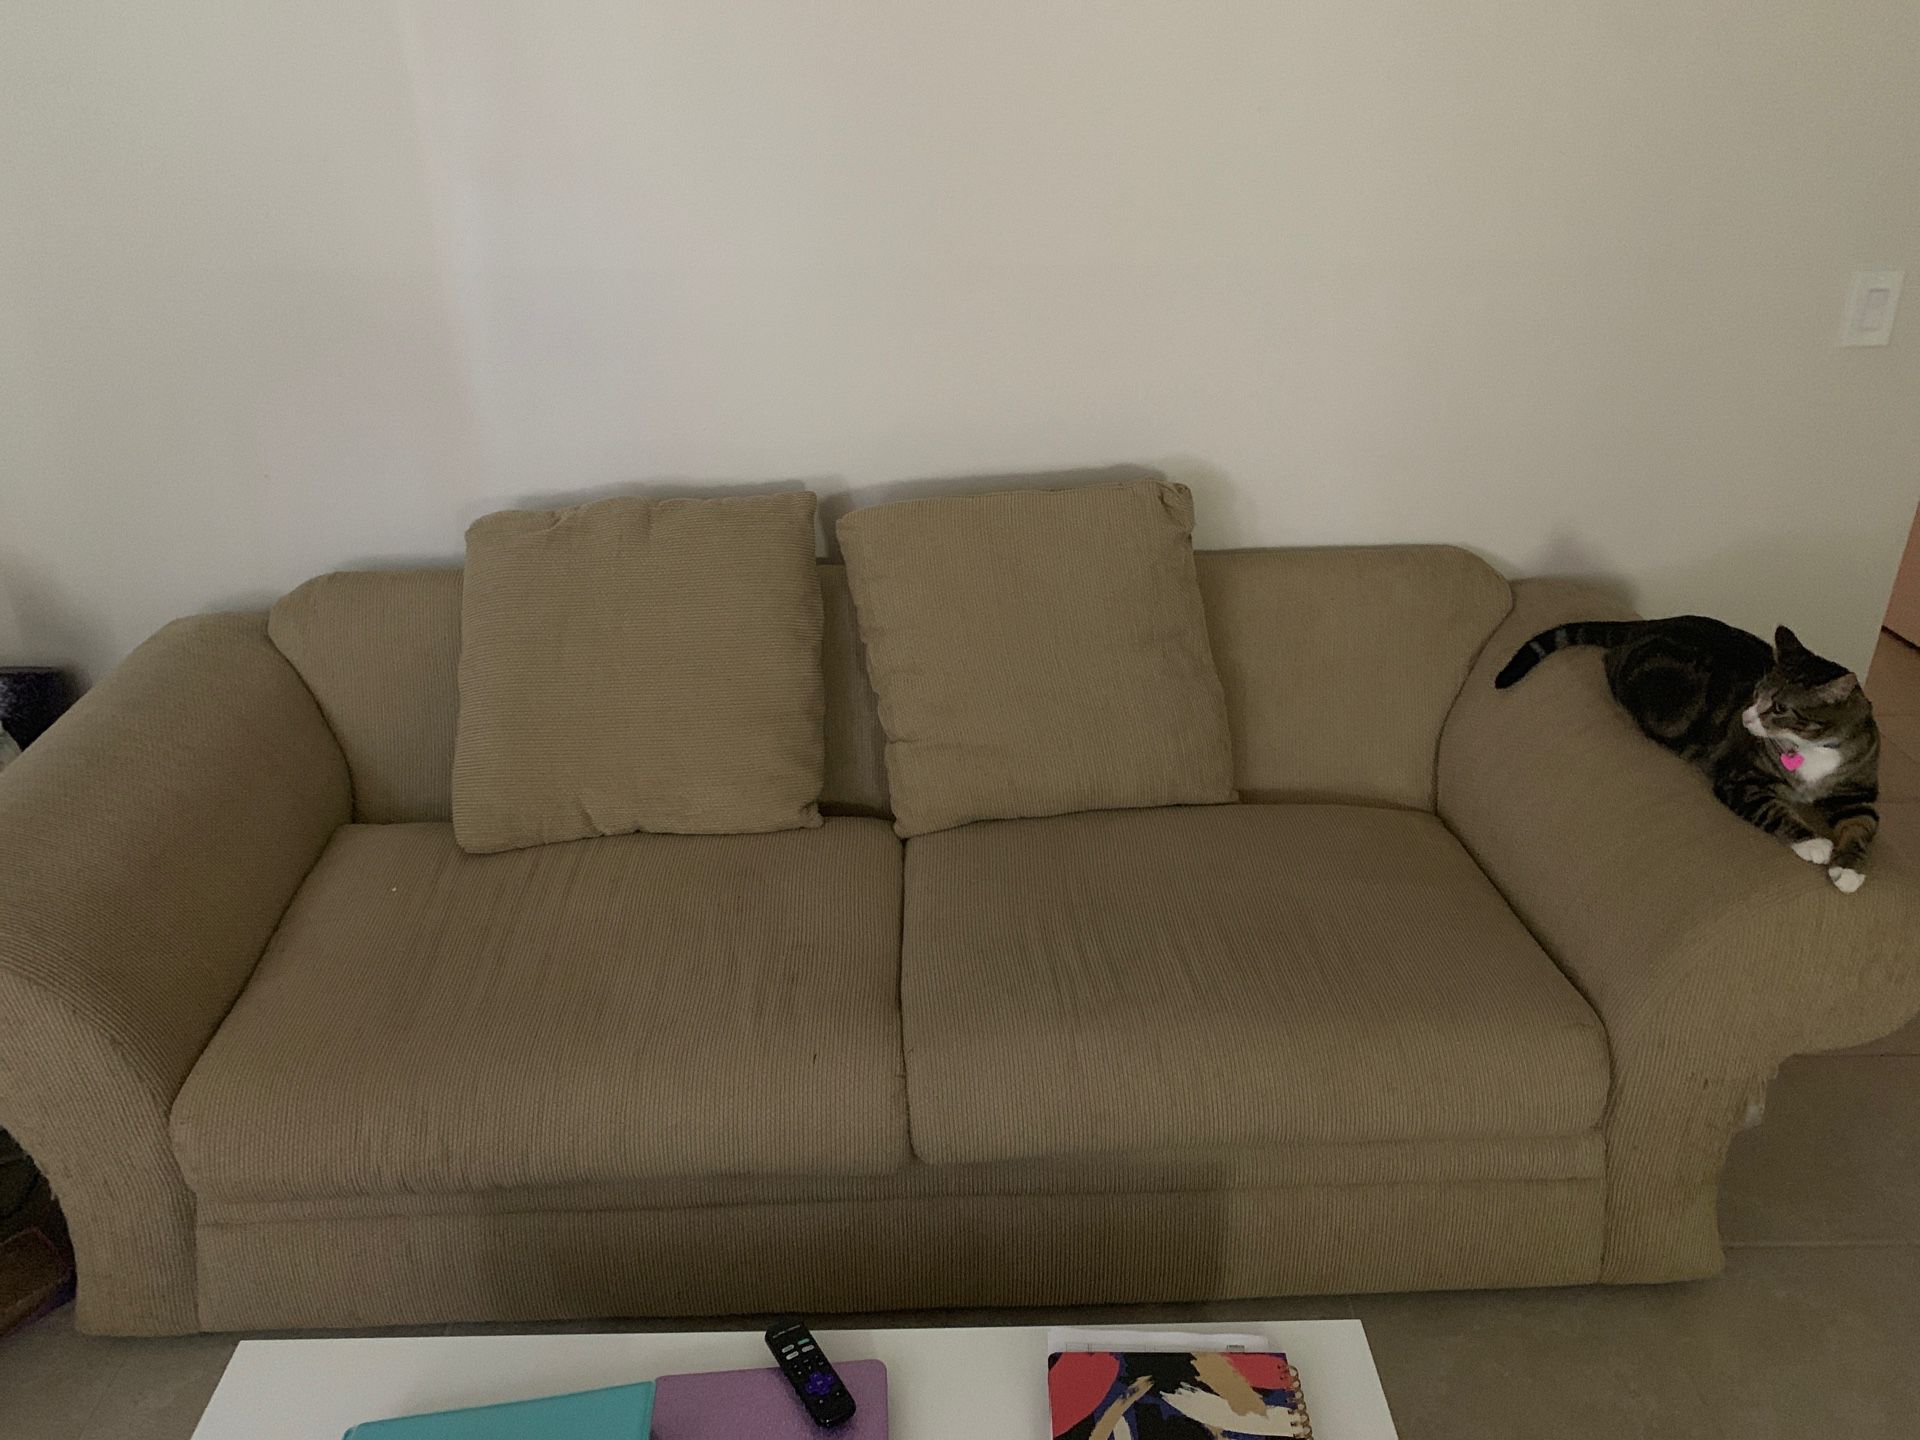 FREE COUCH - moving MUST BE GONE TODAY!!!! Super comfortable. If you get two more pillows like I did it looks cute and feels more comfy